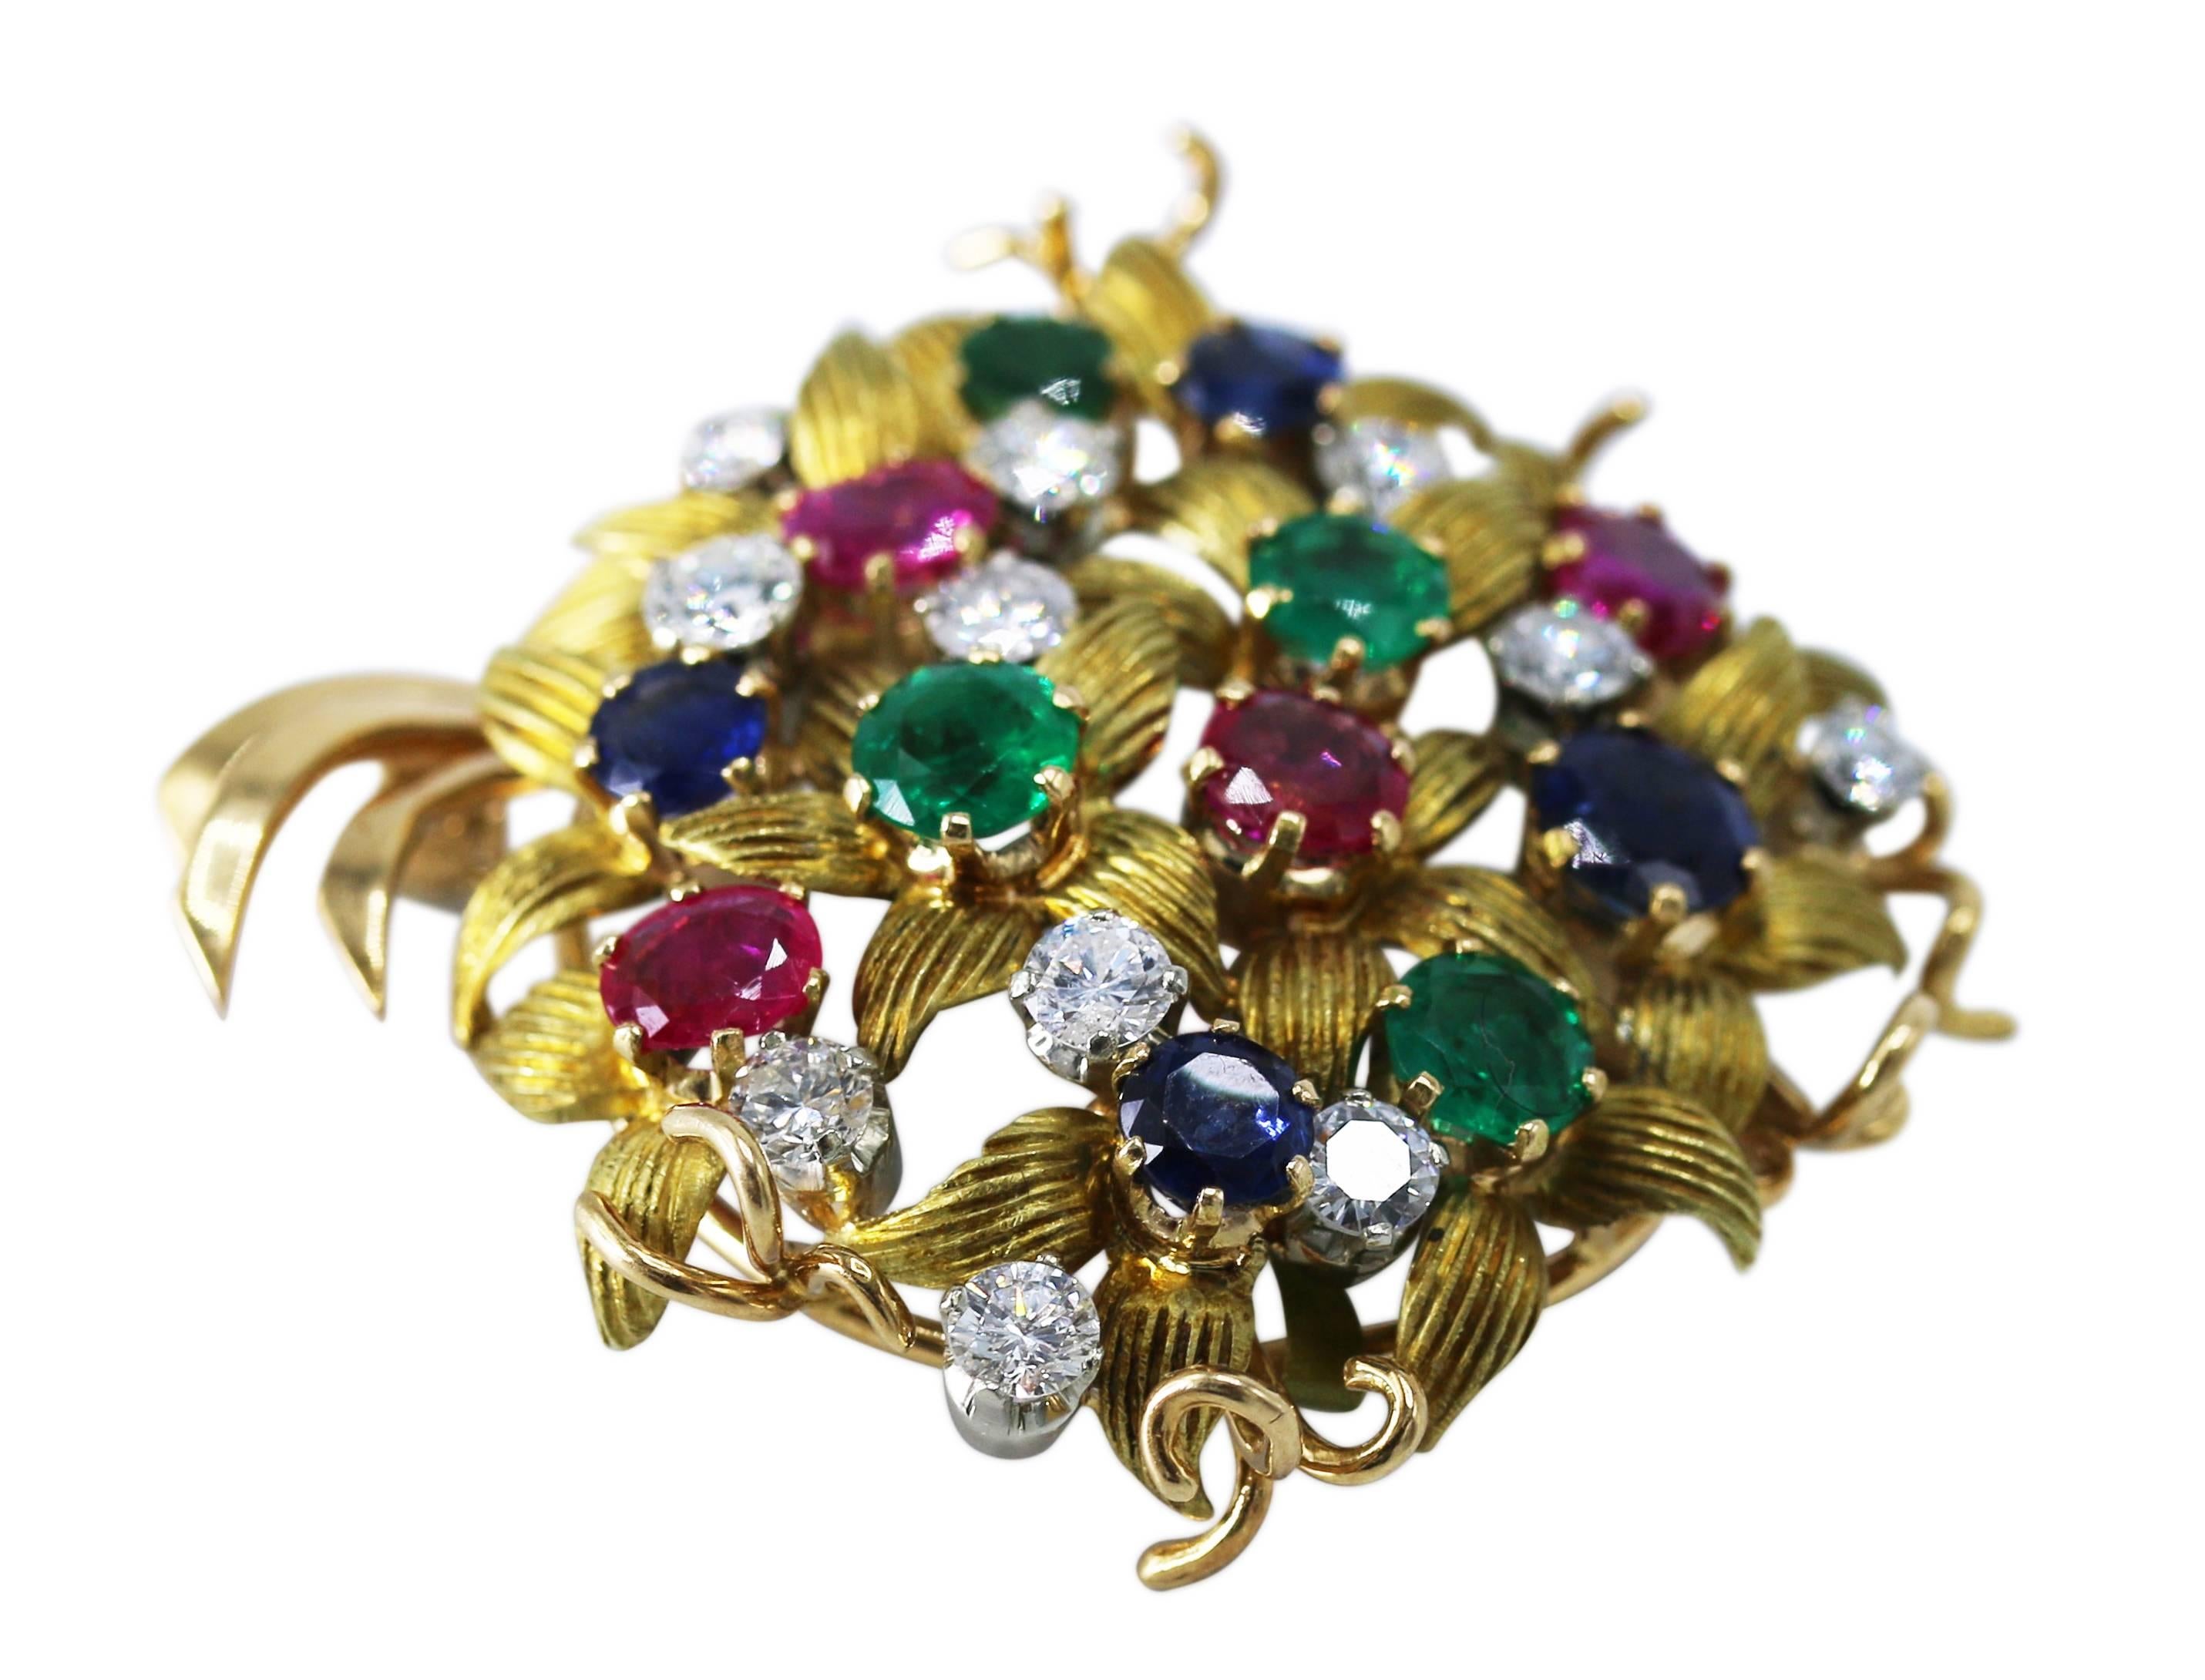 18 karat two-tone gold, sapphire, emerald, ruby, and diamond bouquet brooch, designed as a floral bouquet of round sapphires, round emeralds, round rubies and round diamonds, accented by textured gold leaves, total diamond weight 1.50 carats, gross